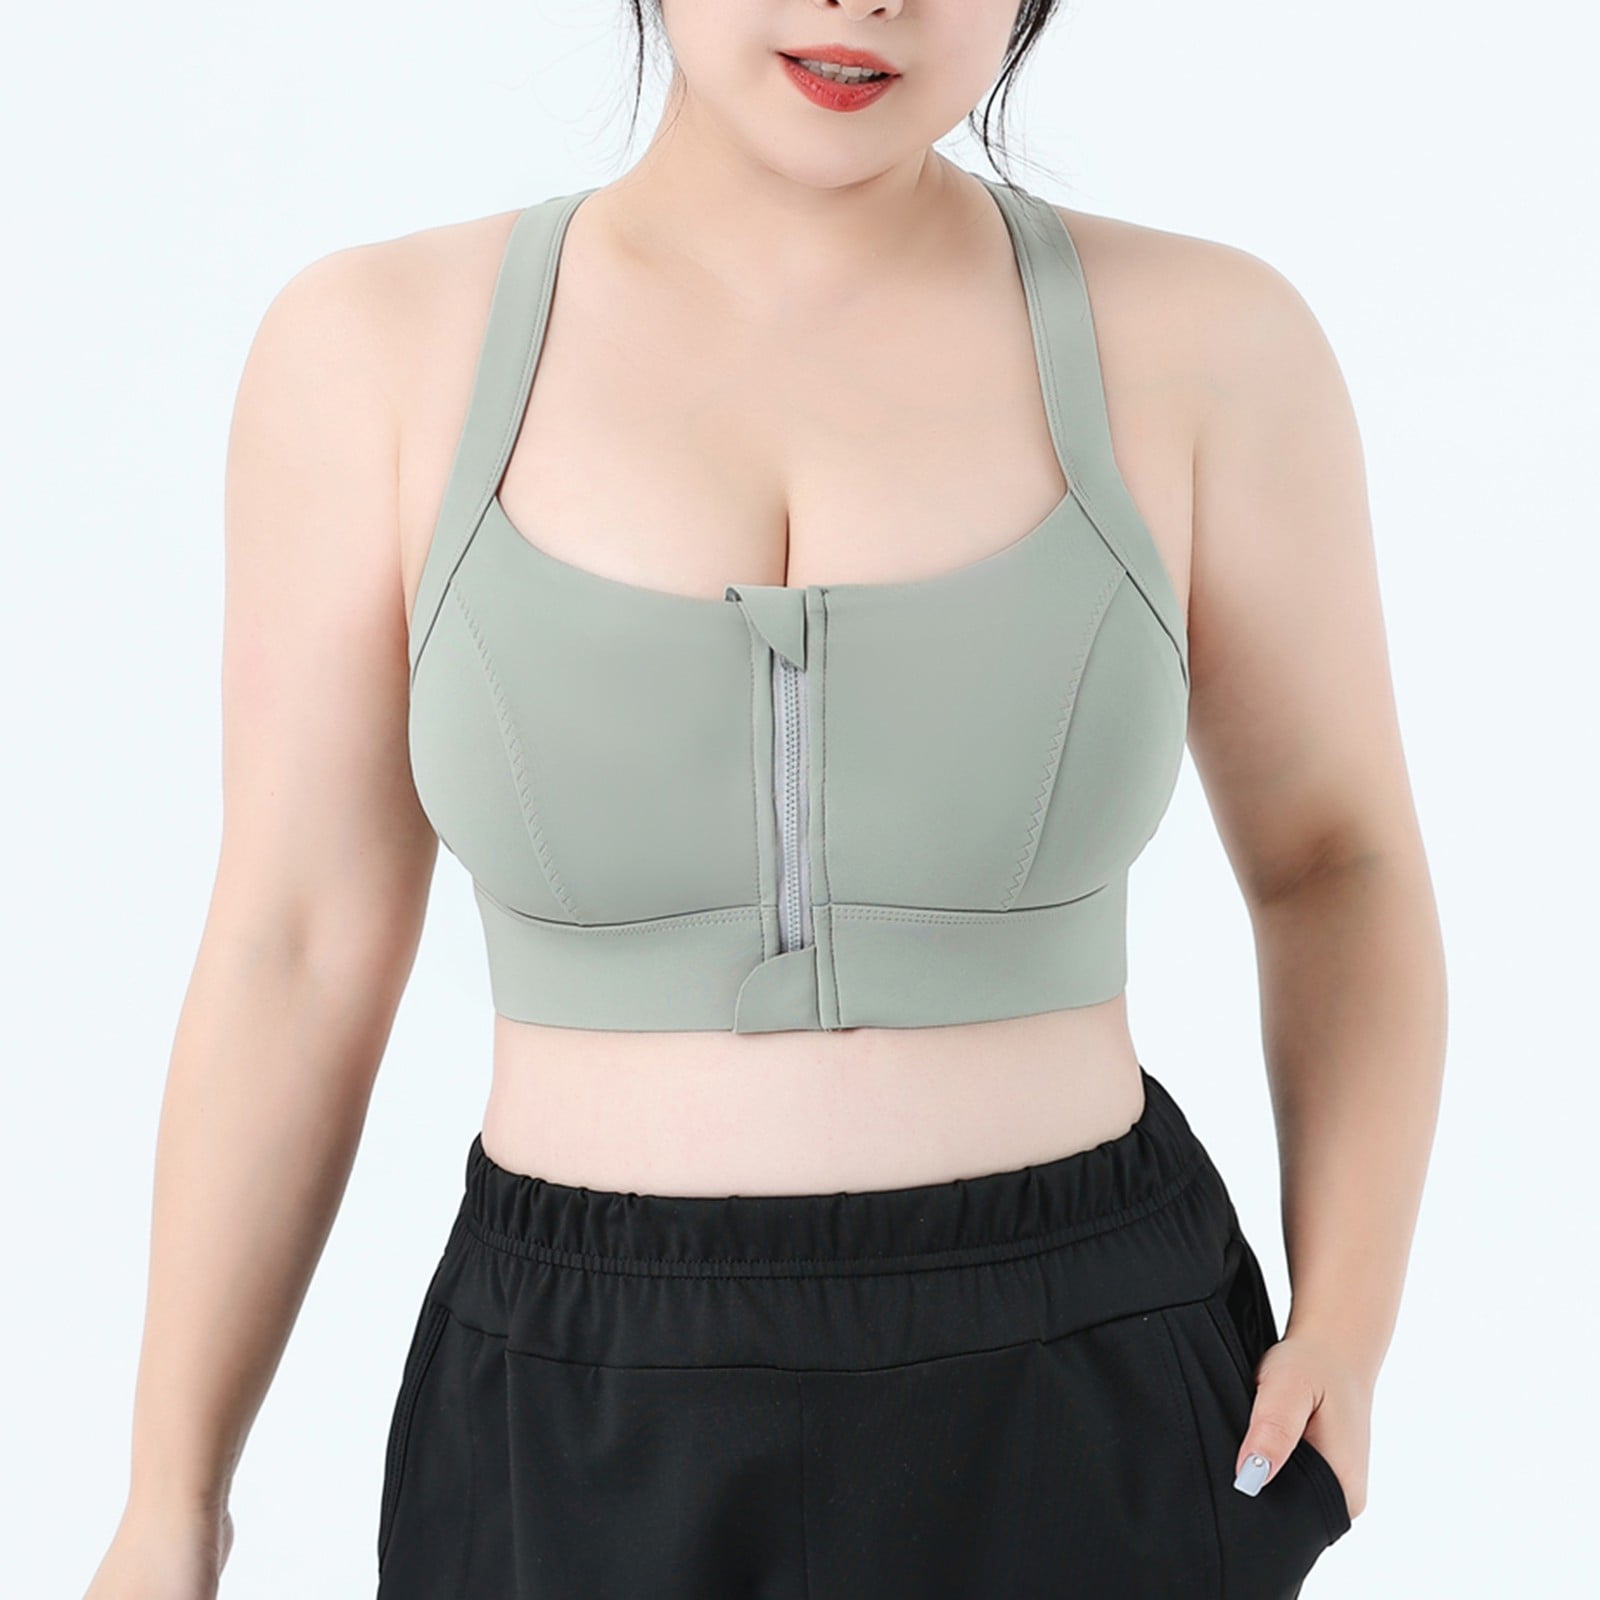 Front Zipper Sports Bra For Women Gym Plus Size 5XL Adjustable Fitness Yoga  Shockproof High Support All-in-one Bras Top